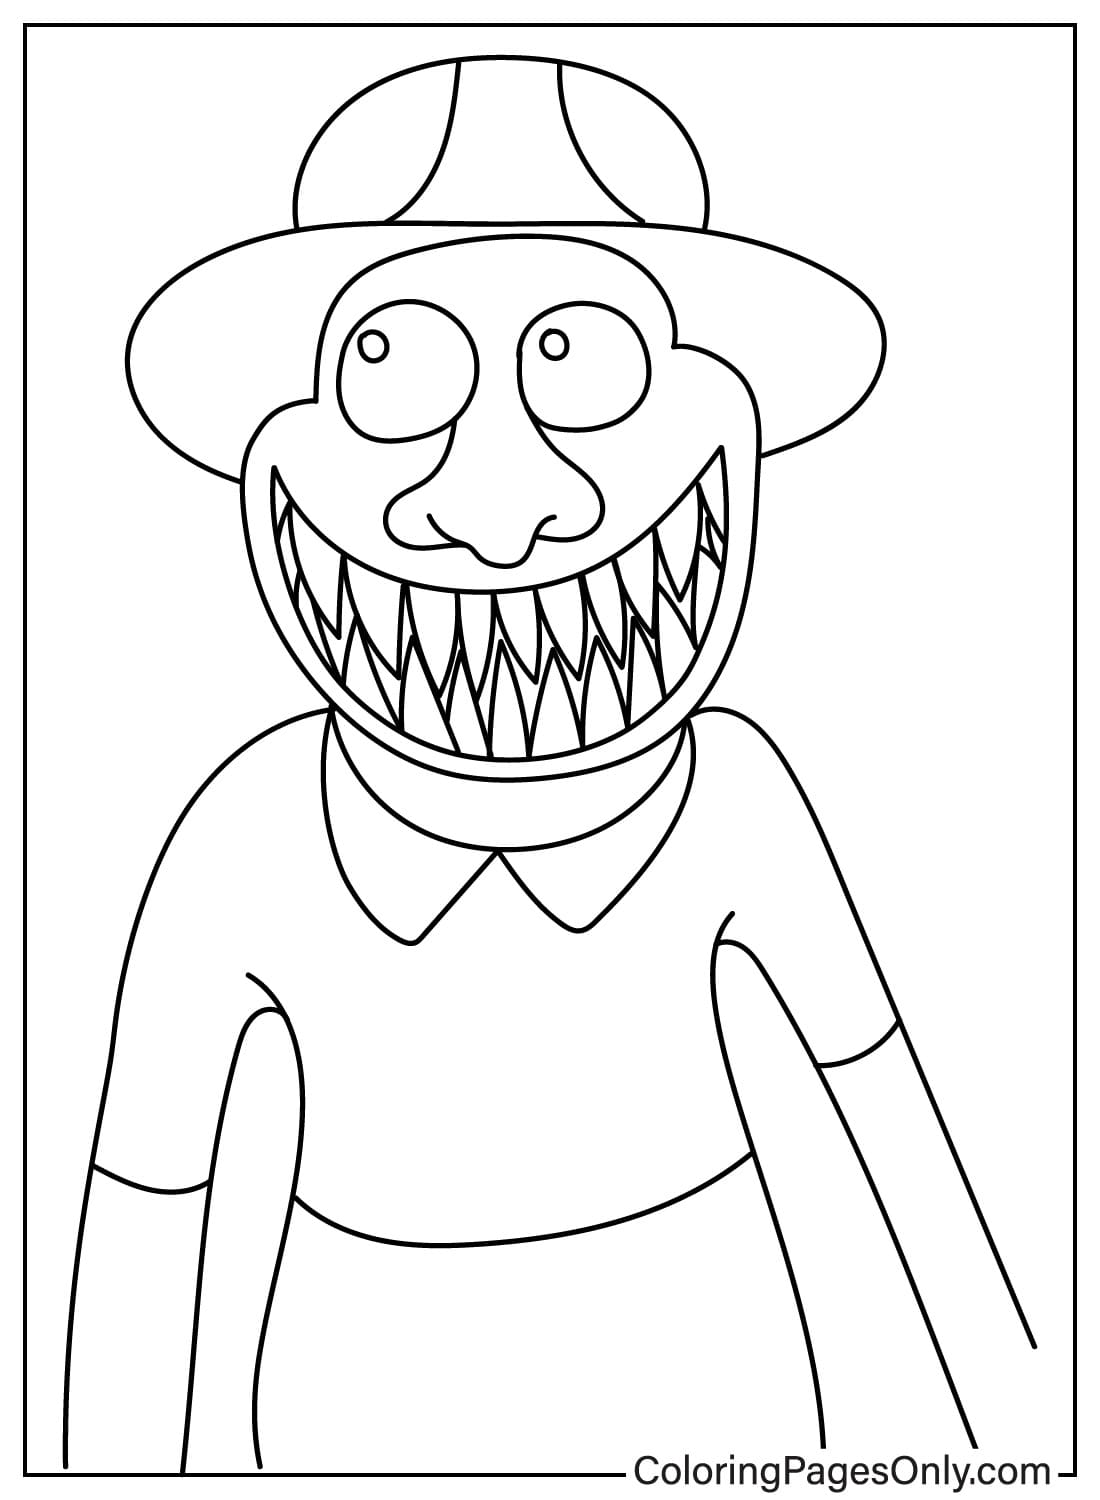 Zoonomaly Coloring Page from Zoonomaly